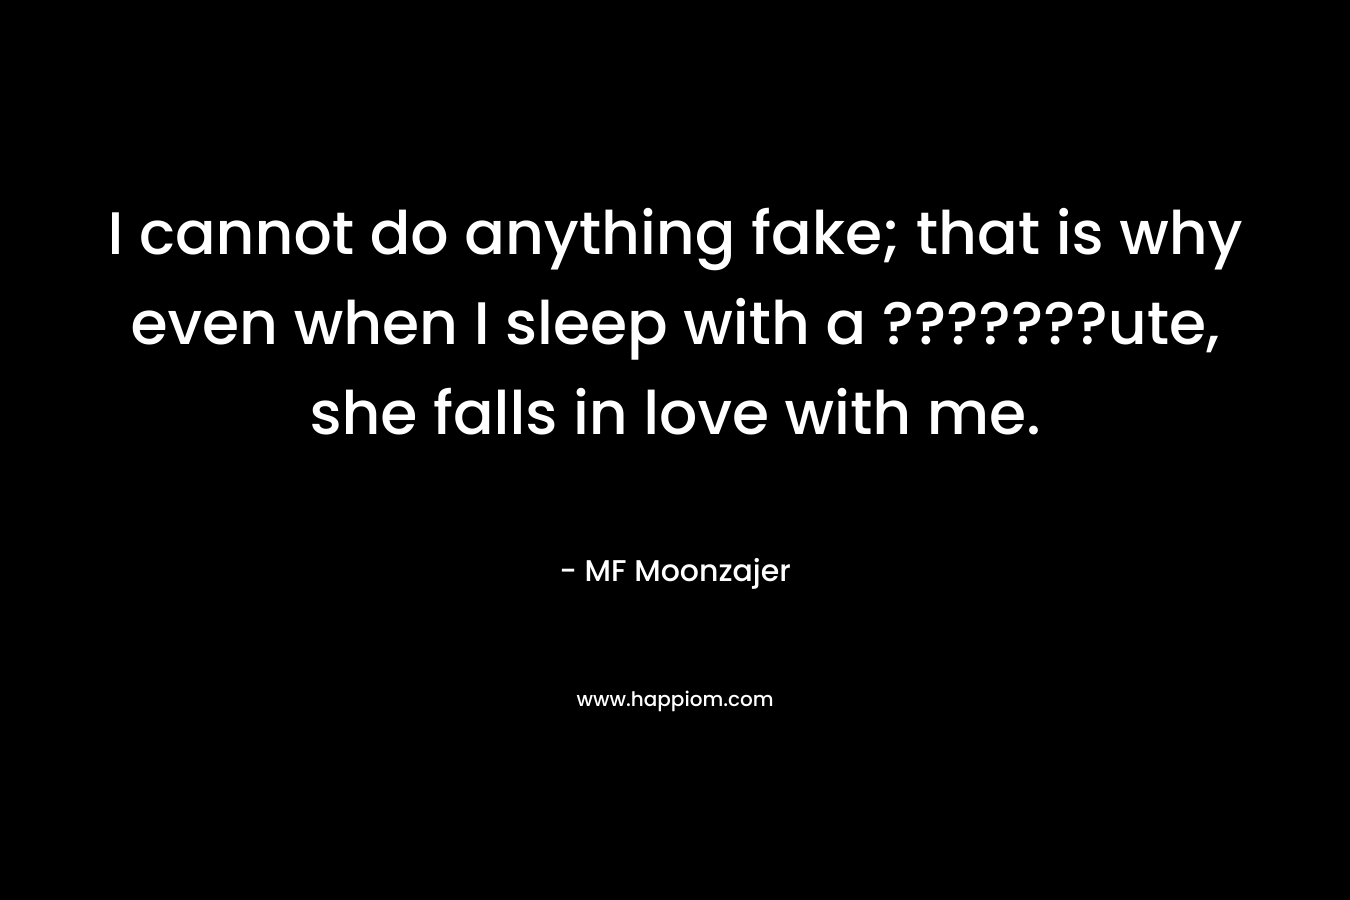 I cannot do anything fake; that is why even when I sleep with a ???????ute, she falls in love with me. – MF Moonzajer